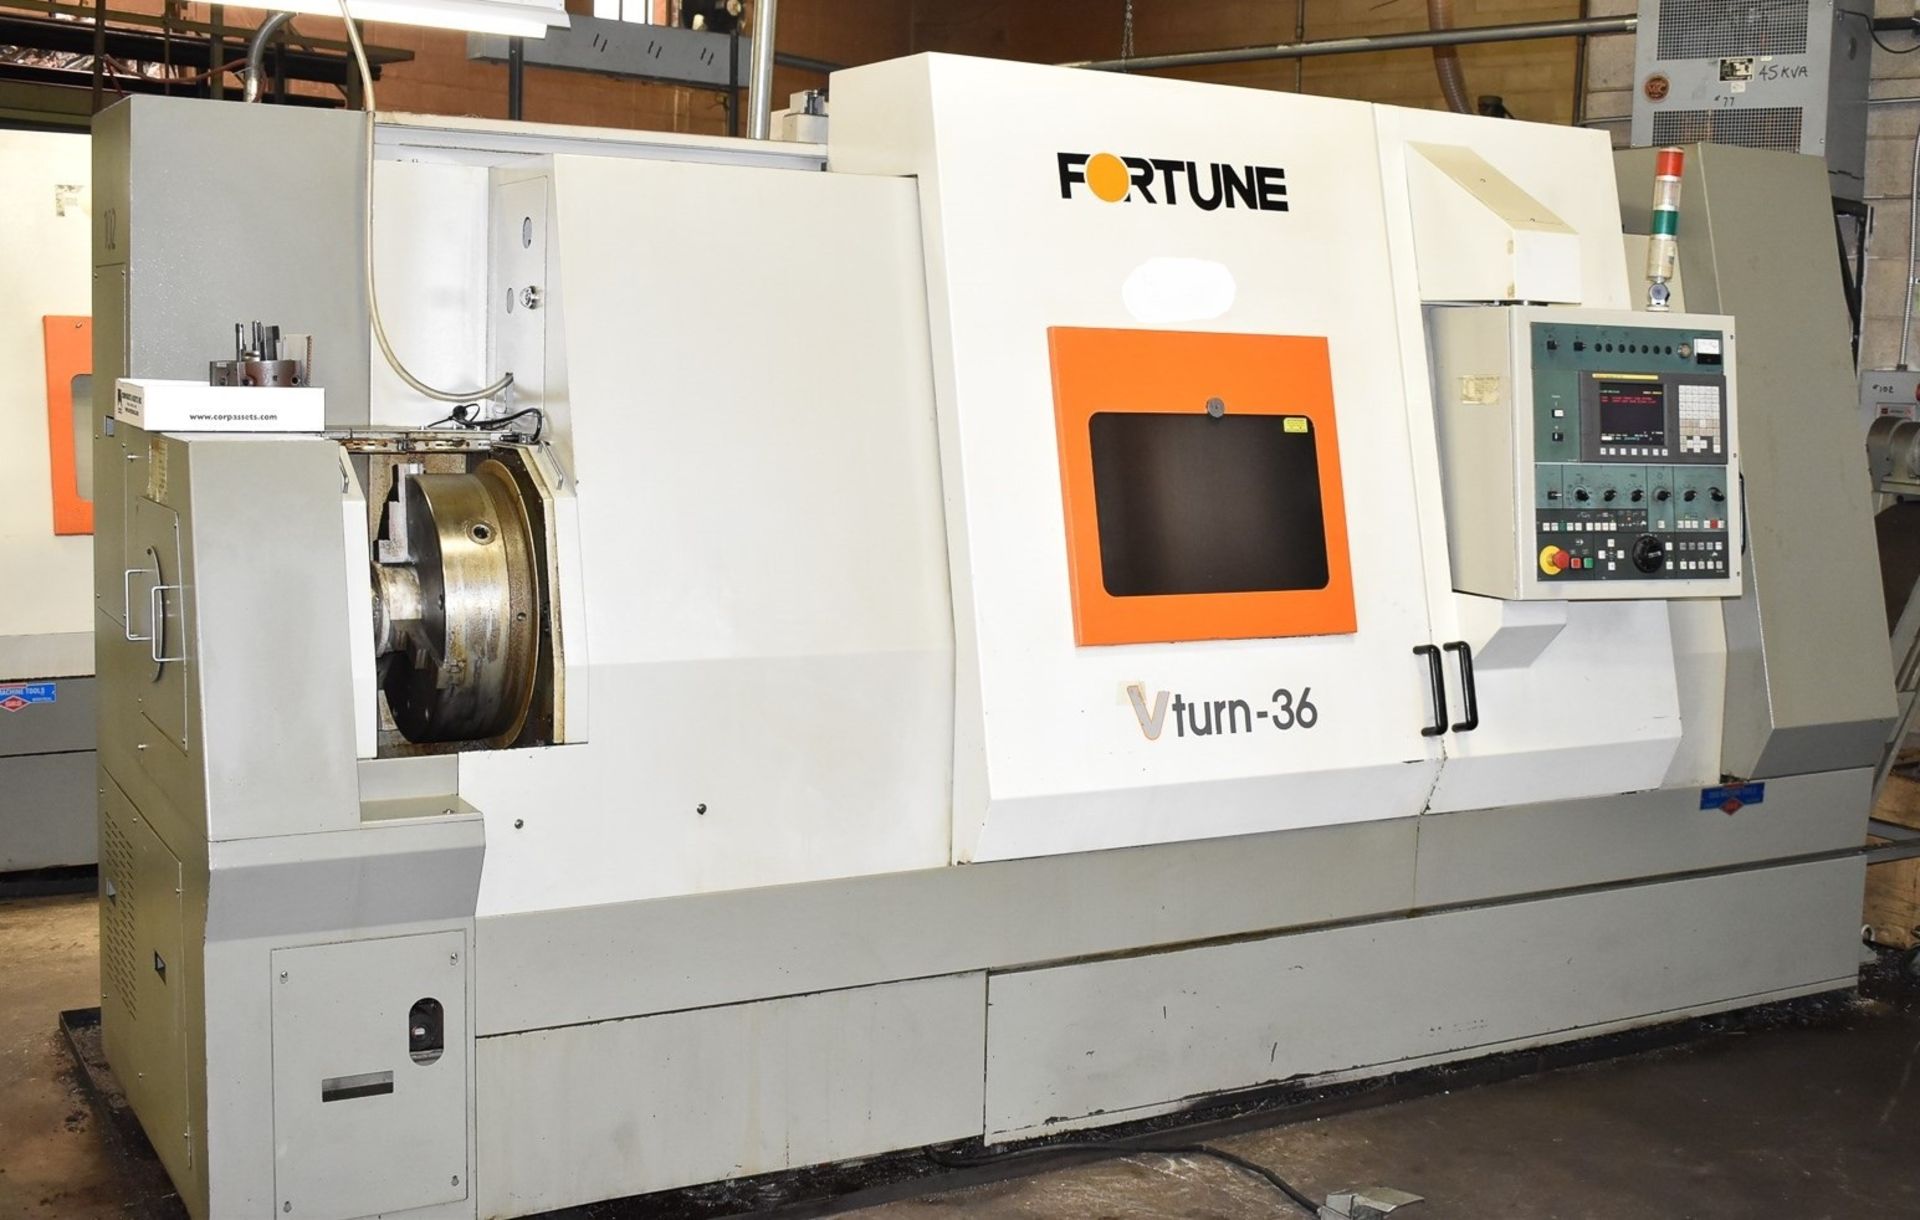 21.65" x 35" Victor (Fortune) Mdl Vturn-36 2-Axis CNC Lathe, S/N MD-1636, New 2007